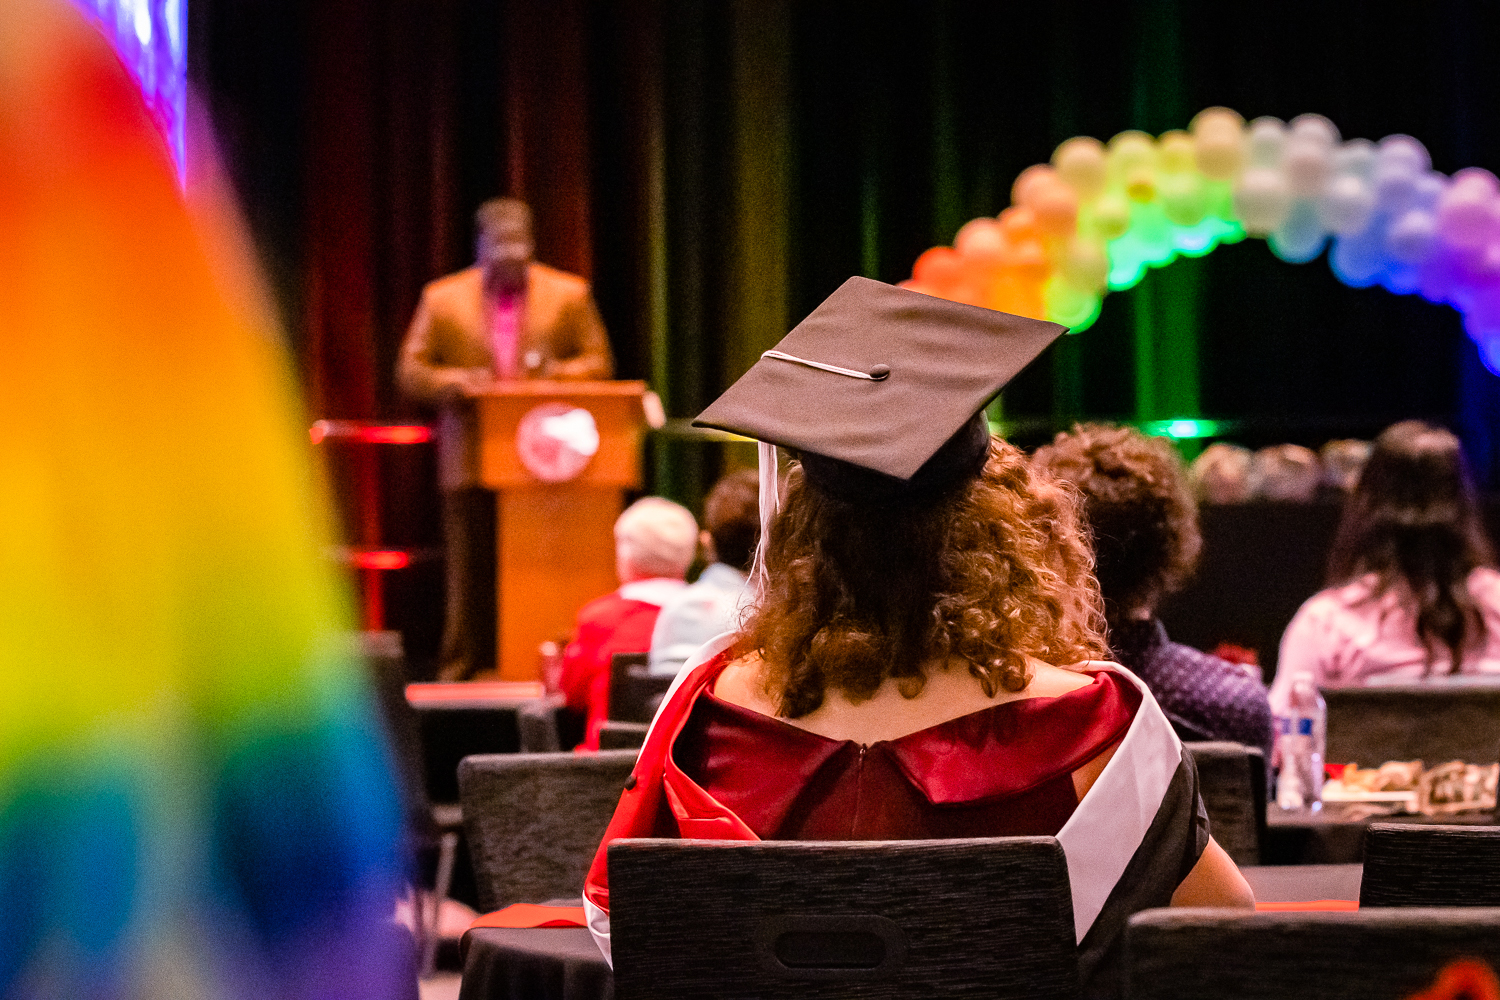 The Rainbow Graduation Celebrations keynote speaker captivates the audience as they explain the importance of LGBTQIA+ visibility to the young queer generations and setting the example that there is life beyond and it will get better. They made this point in the University Student Union on Friday, May 20, 2022, in Northridge, Calif., and uplifted the rainbow graduates of 2022.